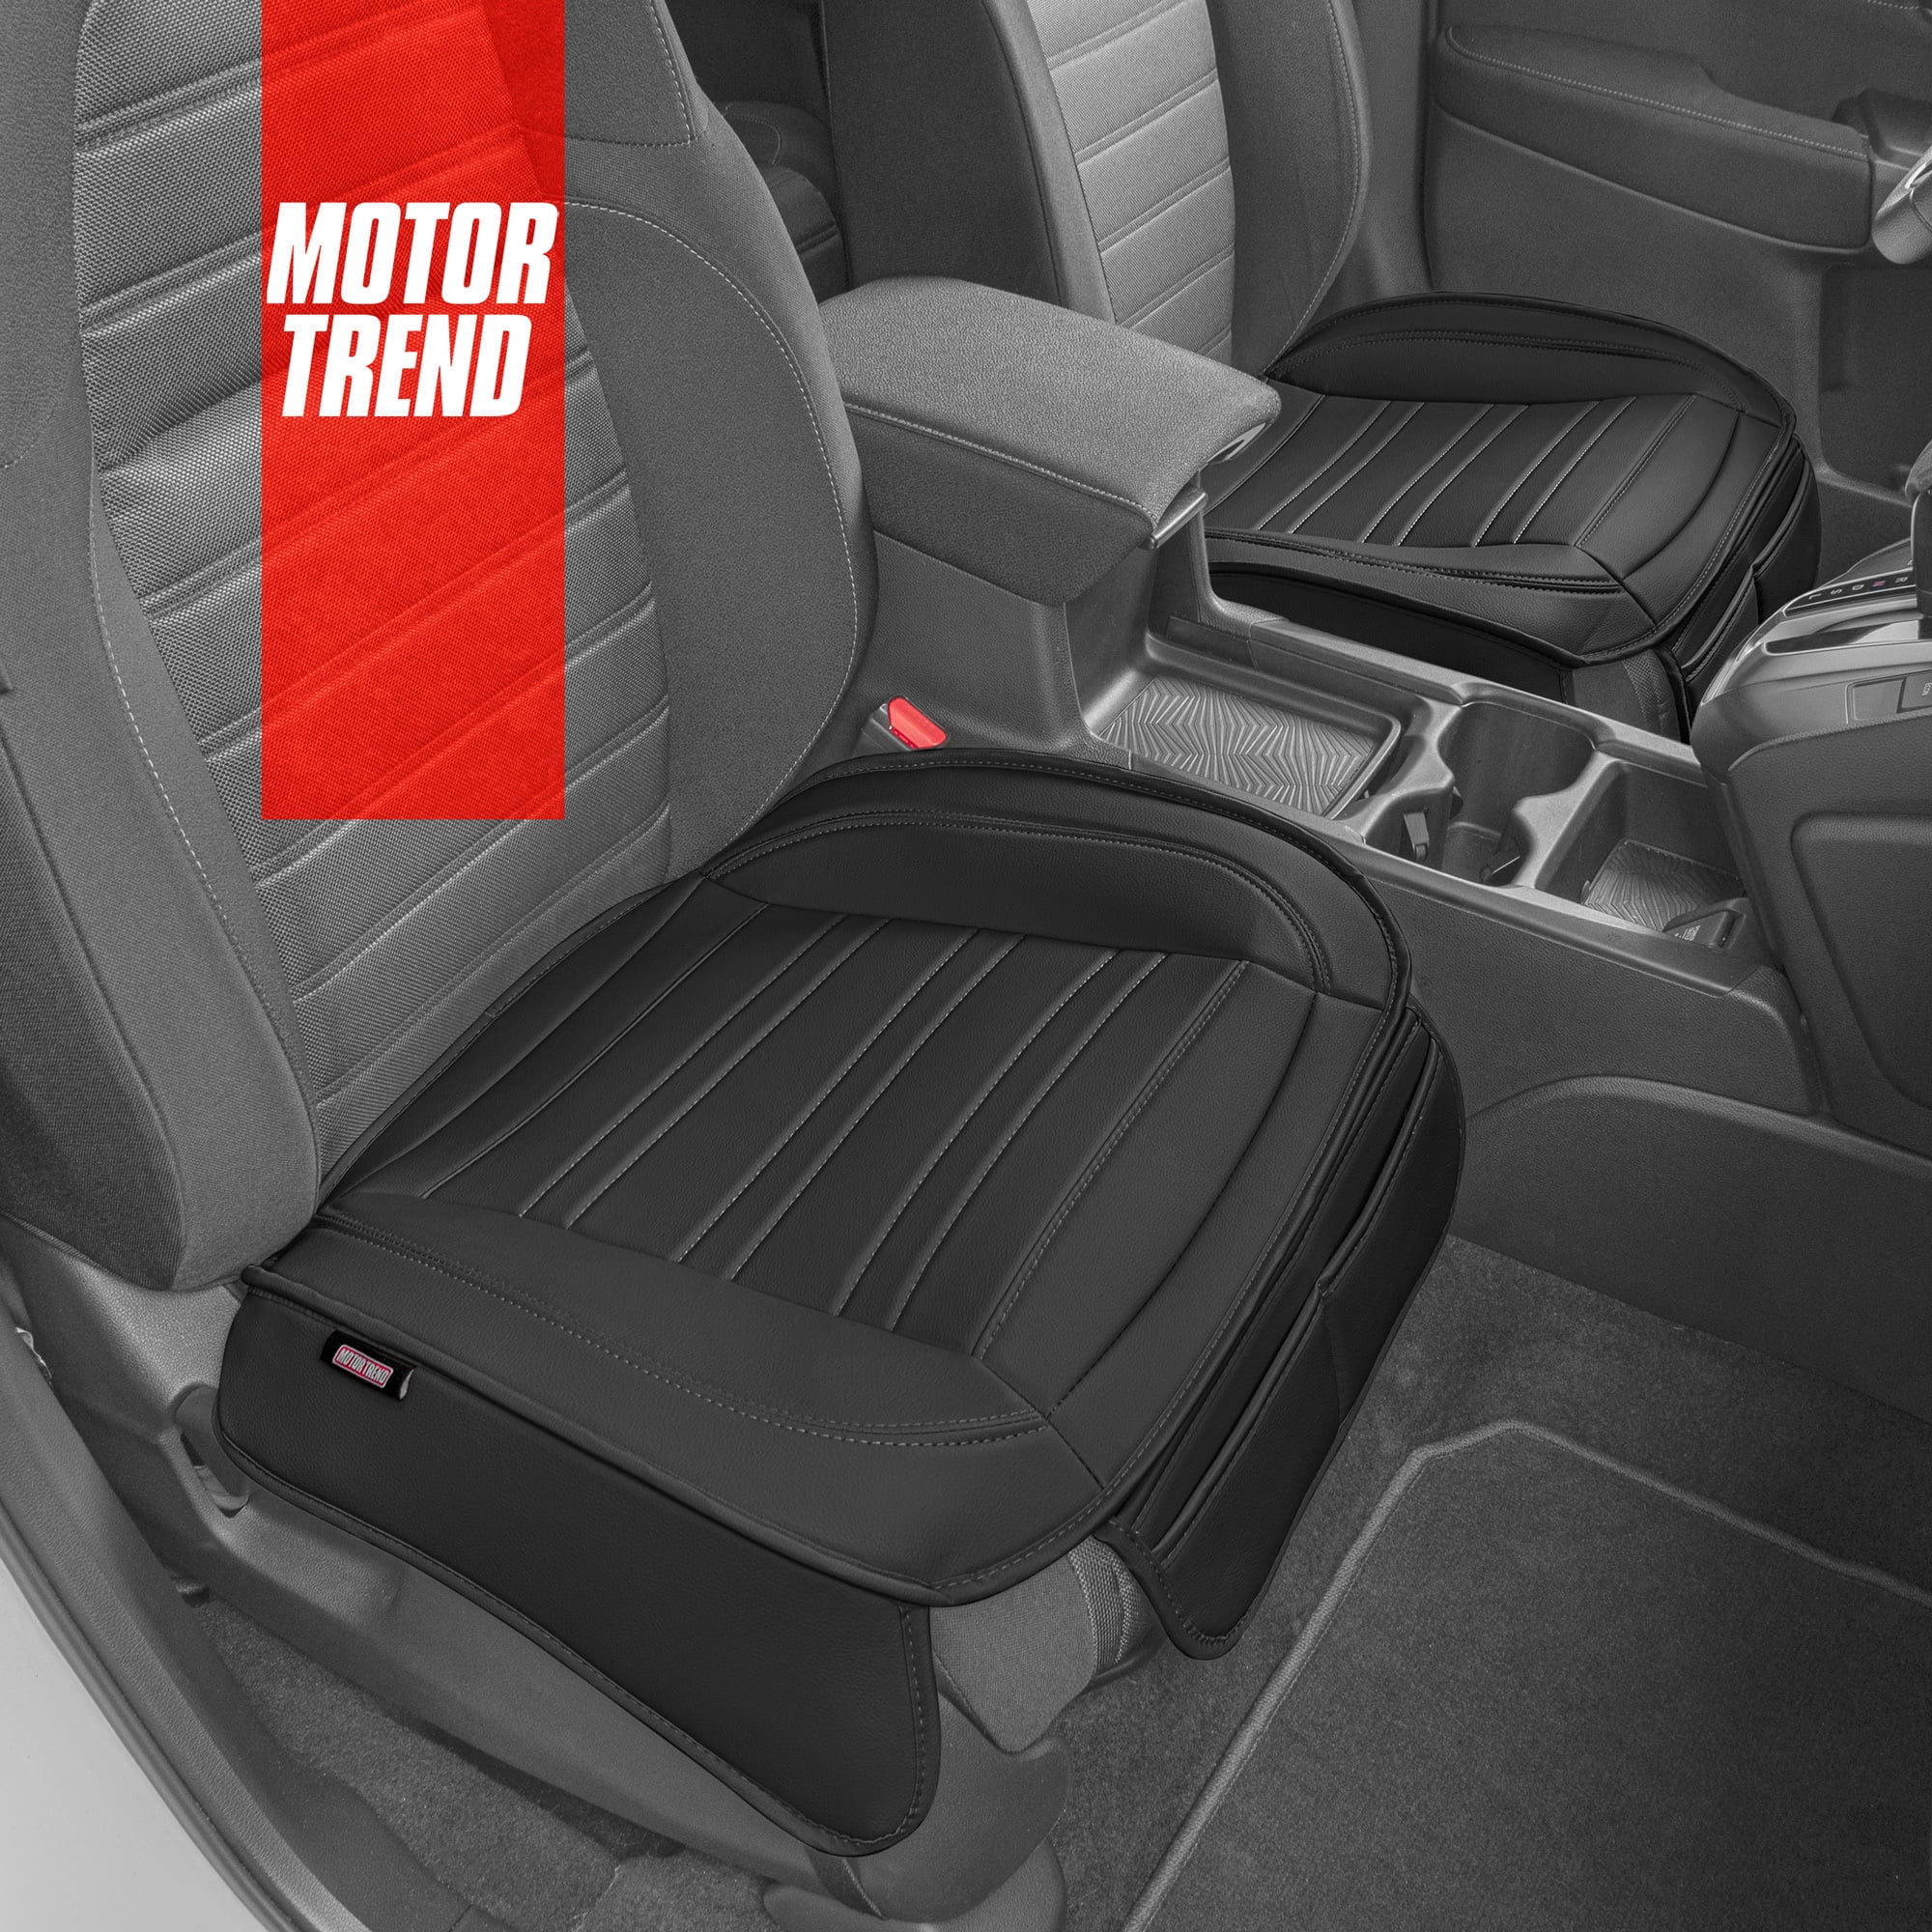 2-Pack Motor Trend Mint Faux Leather Car Seat Covers for Front Seats Premium Interior Accessories for Auto Truck Van SUV Universal Padded Car Seat Cushions with Storage Pockets 